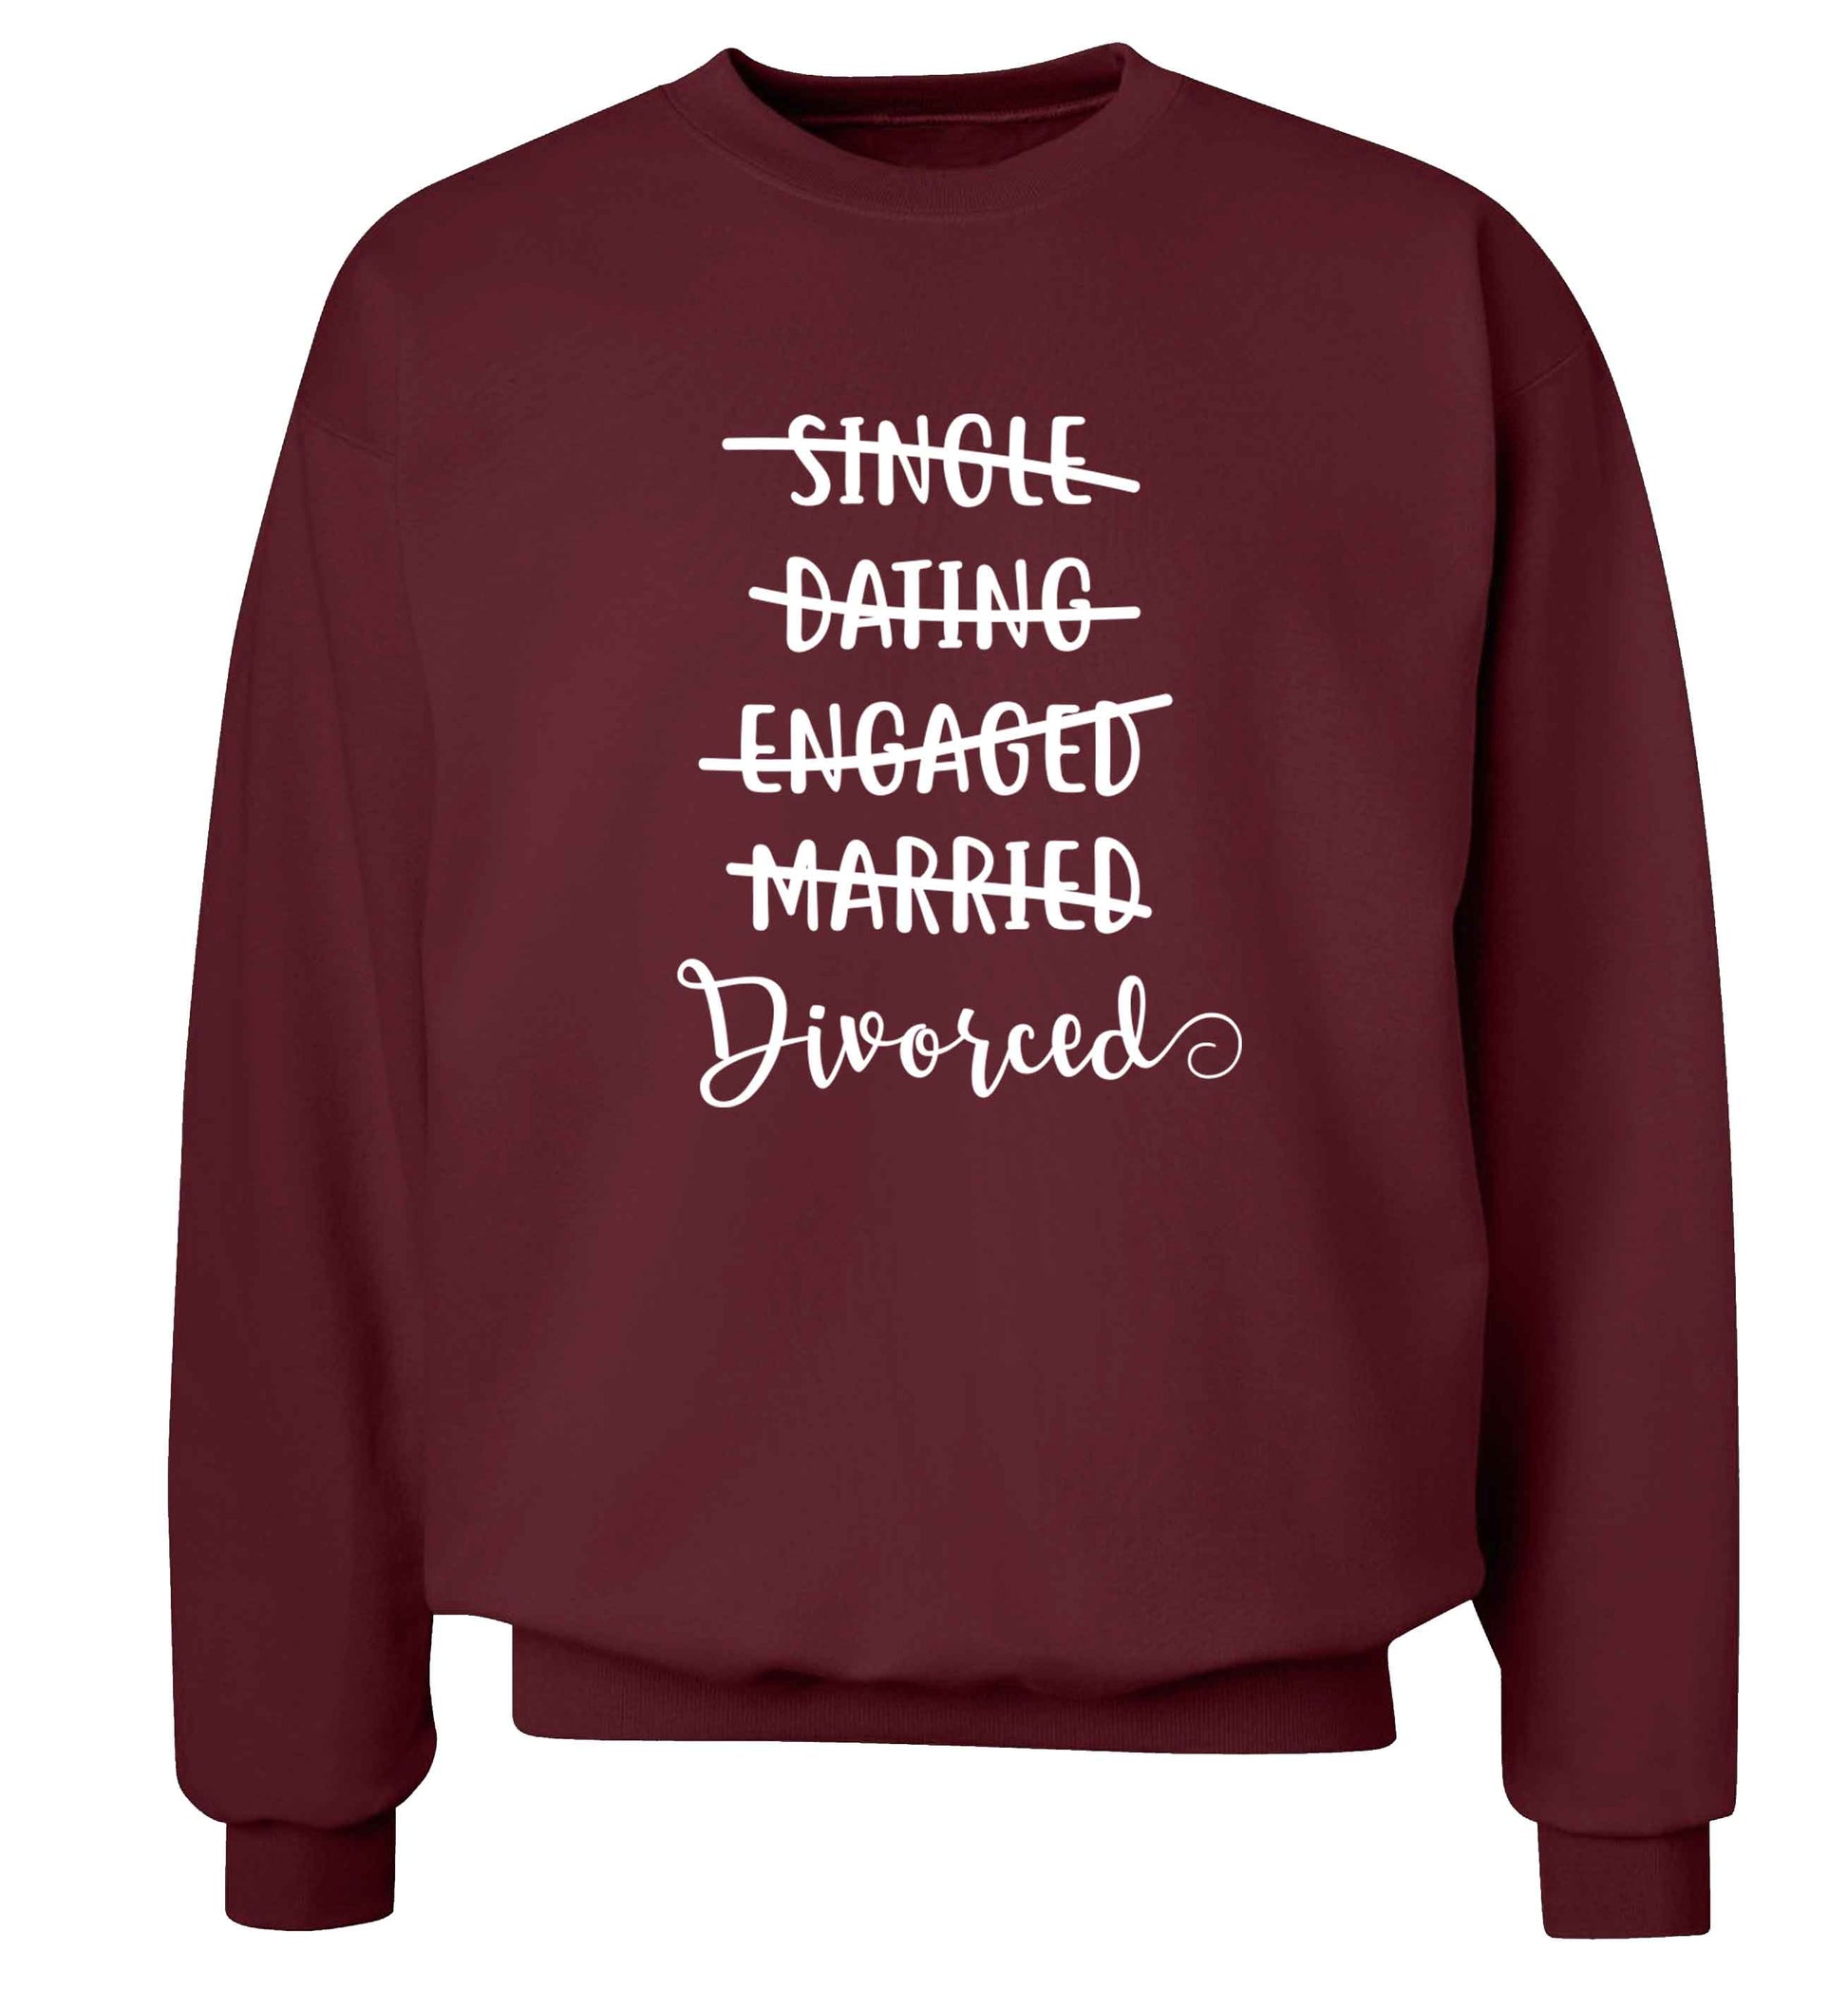 Single, dating, engaged, divorced Adult's unisex maroon Sweater 2XL